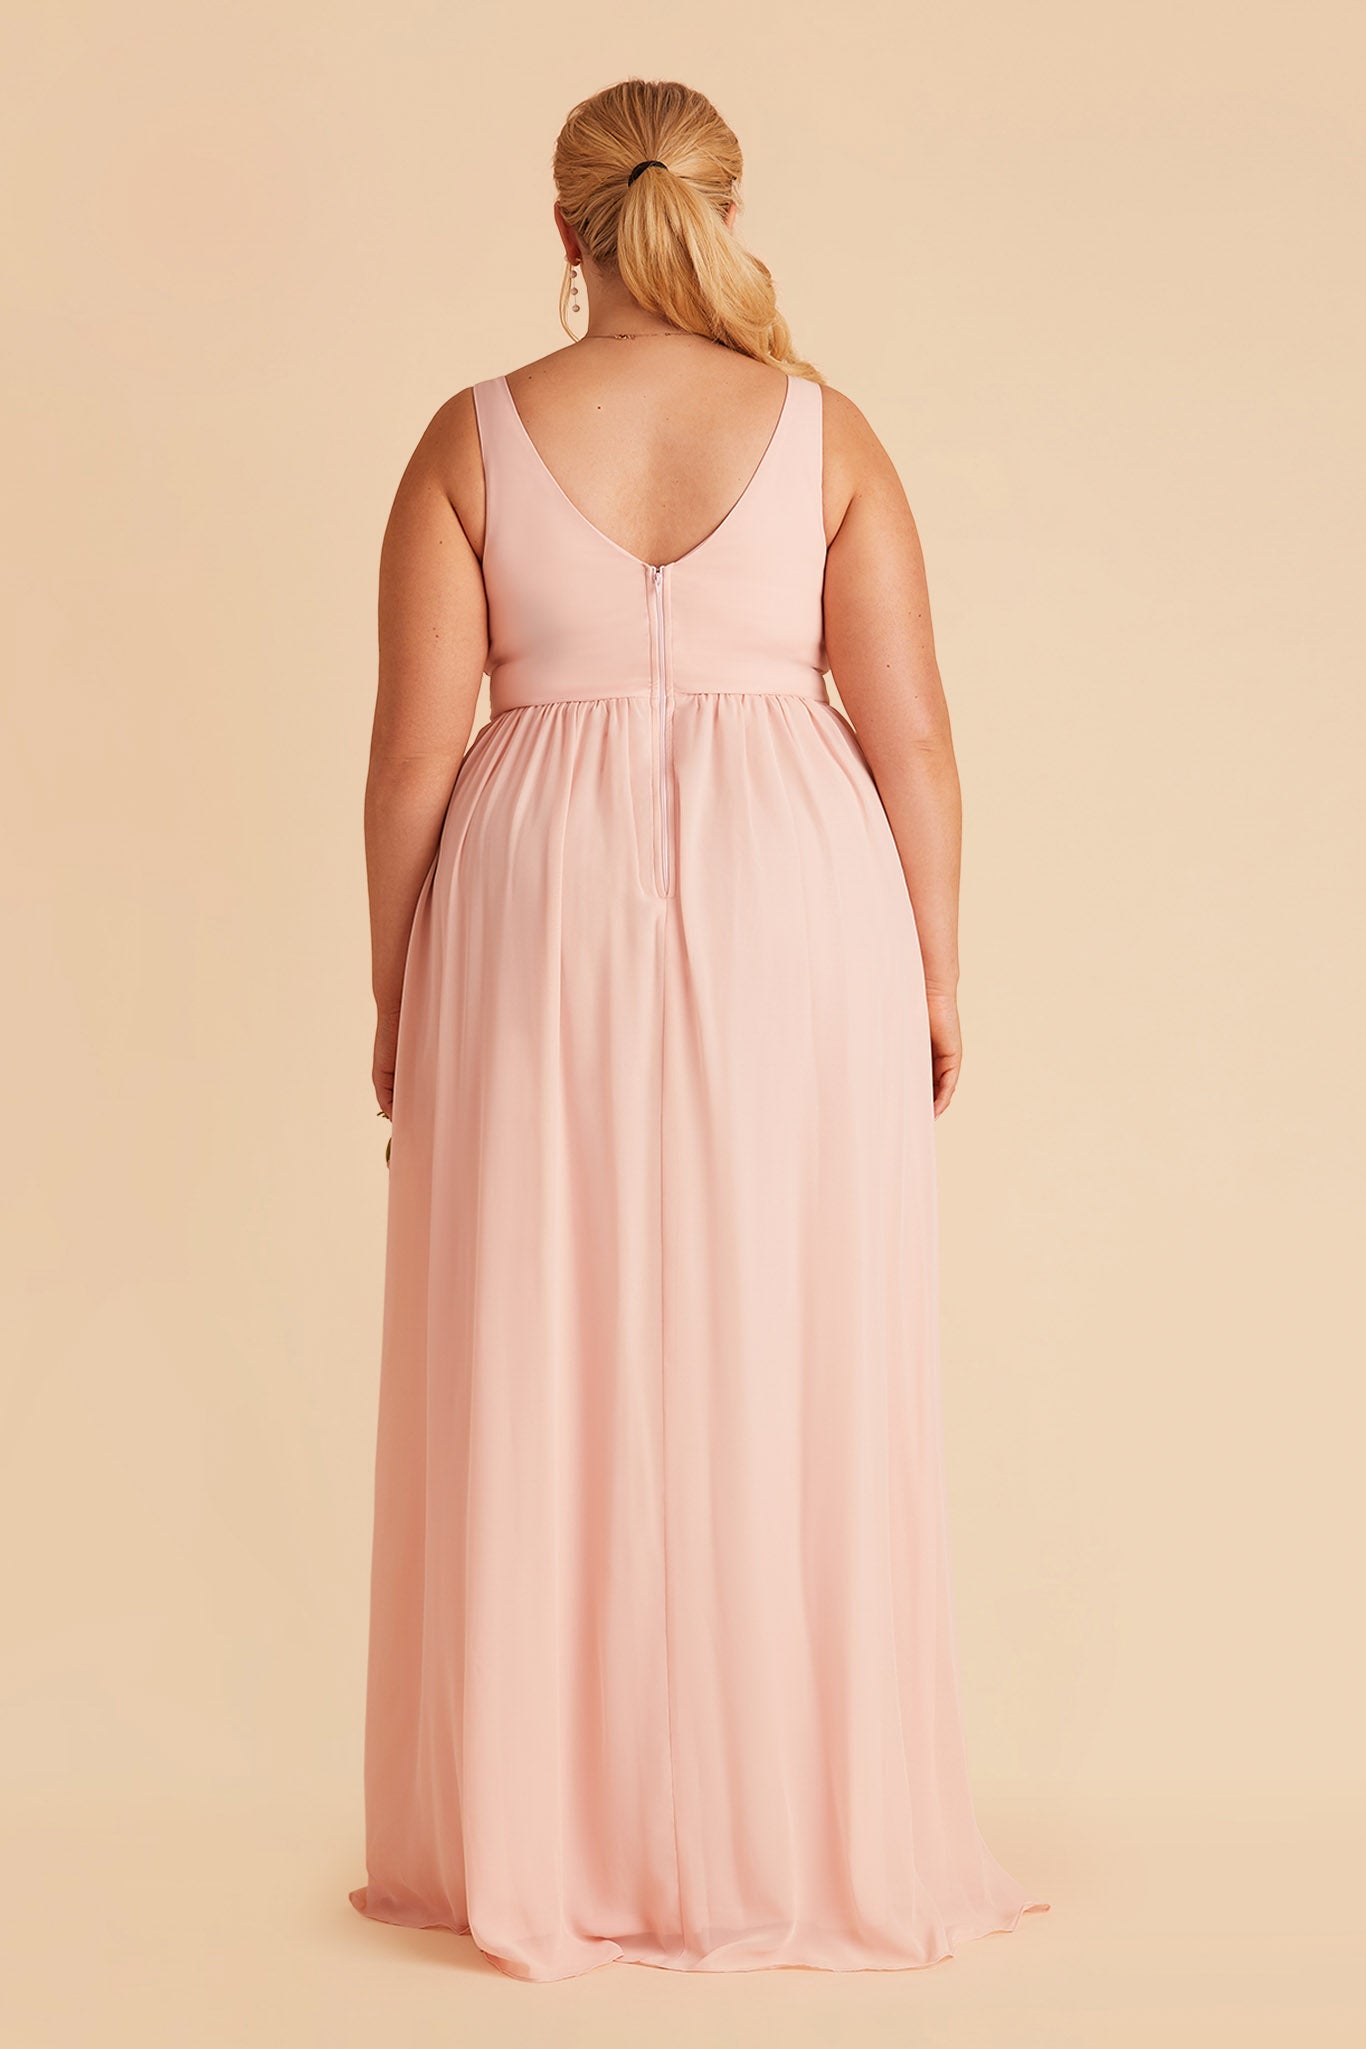 Laurie Empire plus size maternity bridesmaid dress with slit blush pink by Birdy Grey, back view